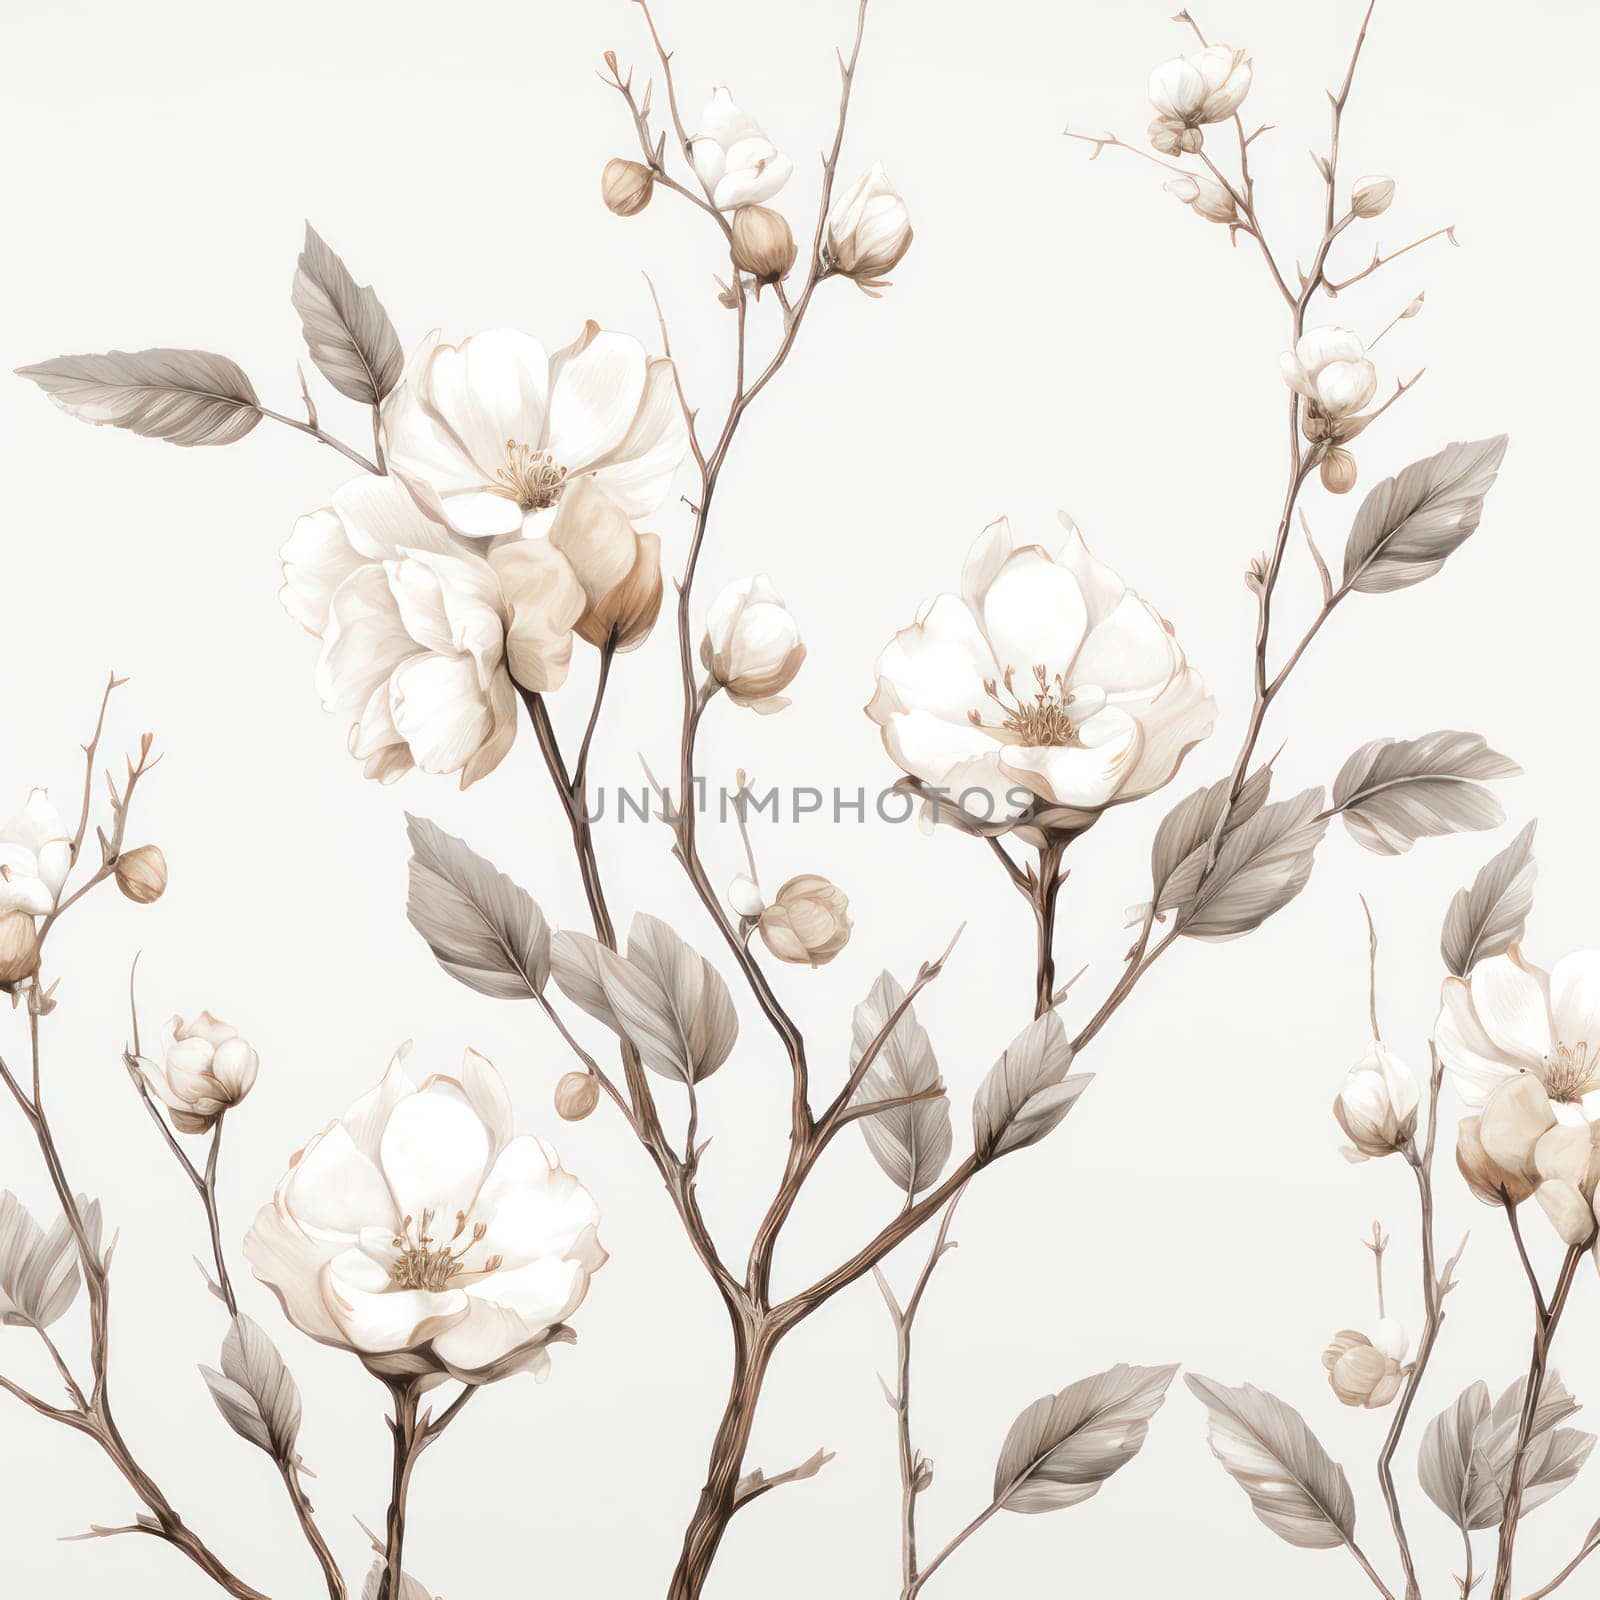 Vintage Floral Elegance: Delicate Magnolia Blossoms on Soft Green Background by Vichizh